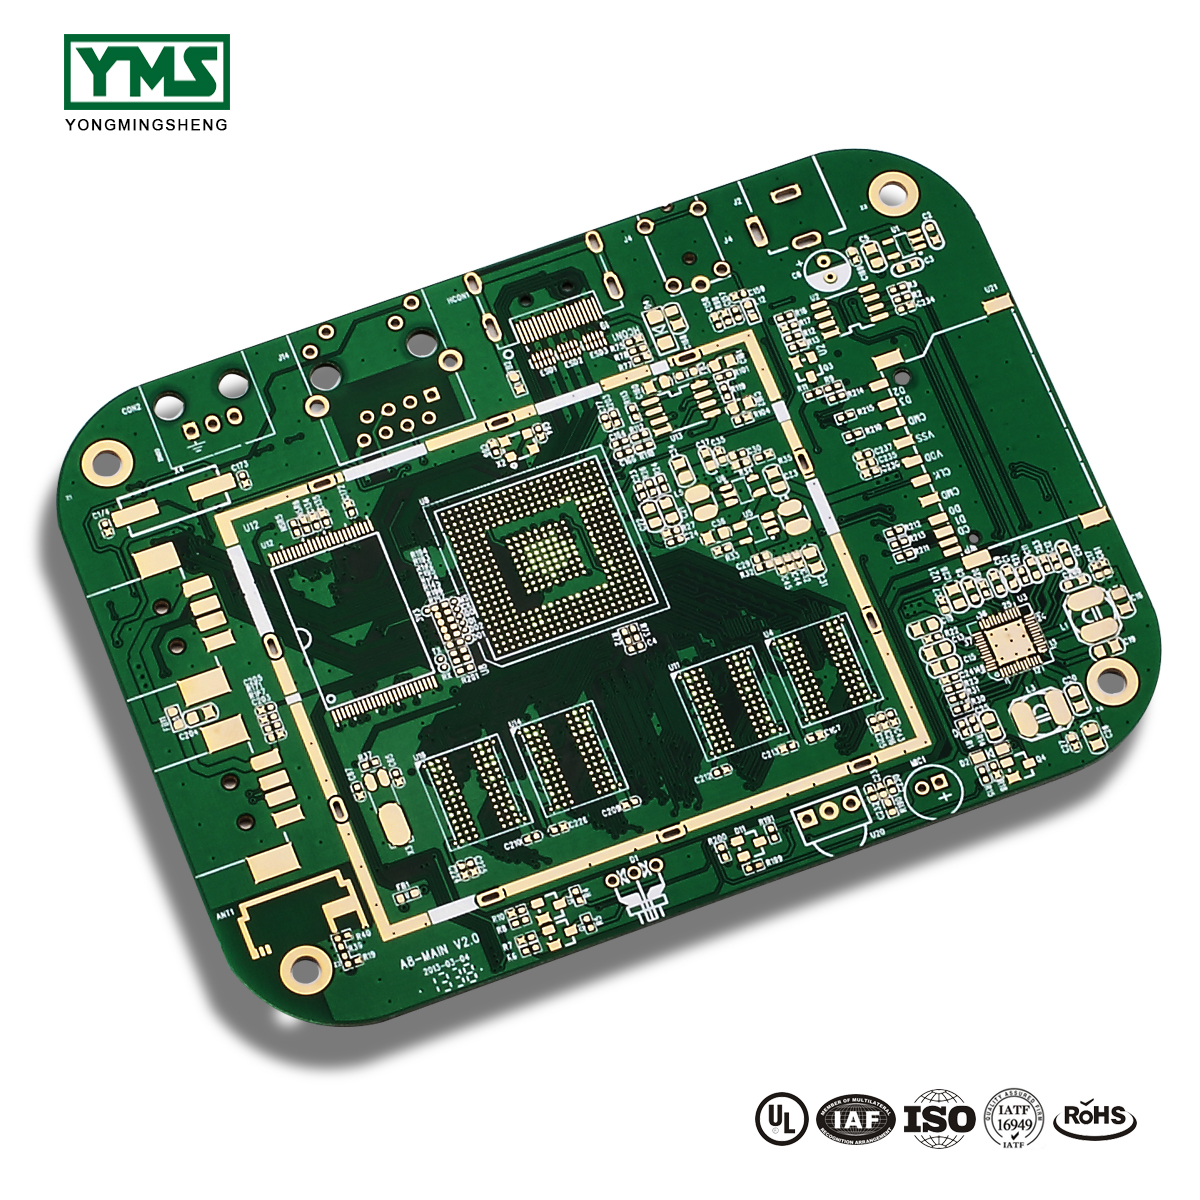 Lowest Price for Selective Gold Plating - Competitive Price for 21 Years Experience Pcb Printed Circuit Board In Shenzhen – Yongmingsheng